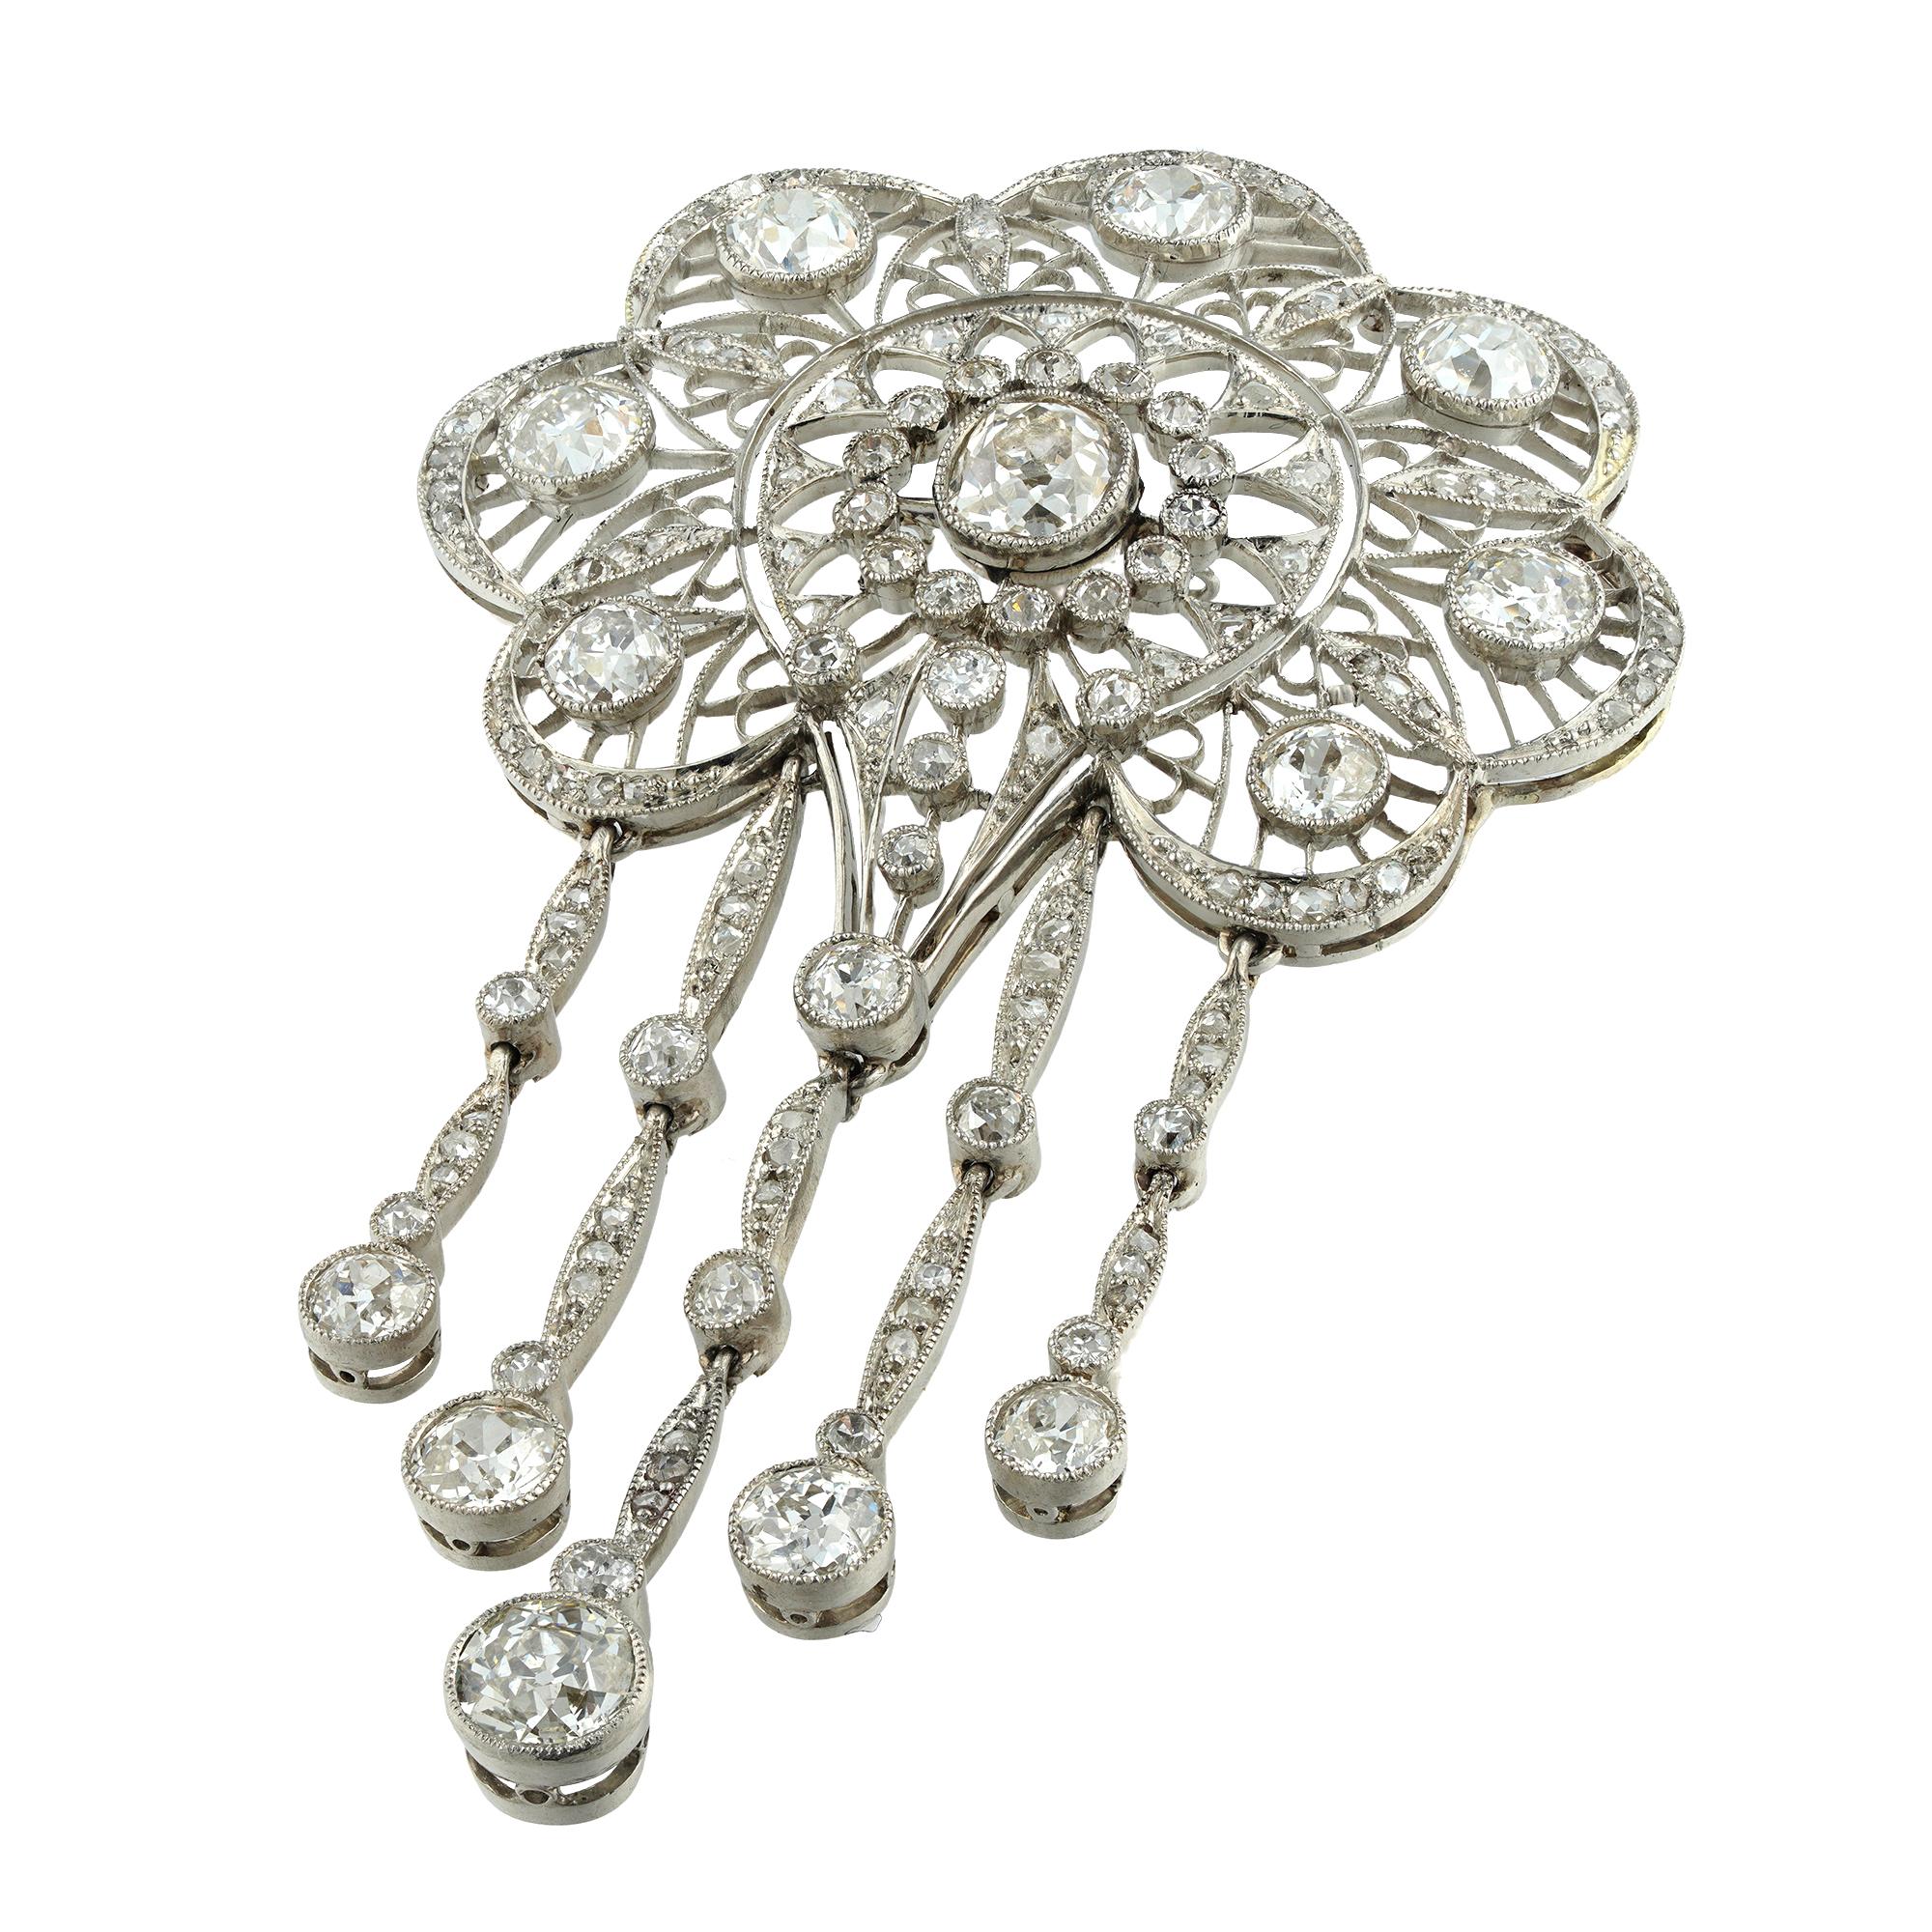 An Edwardian diamond openwork brooch/pendant, to the centre an old mine-cut diamond estimated to weigh 0.7 carats, within a cluster formed by fourteen small old European-cut diamonds, to a fine openwork design surround set with seven old